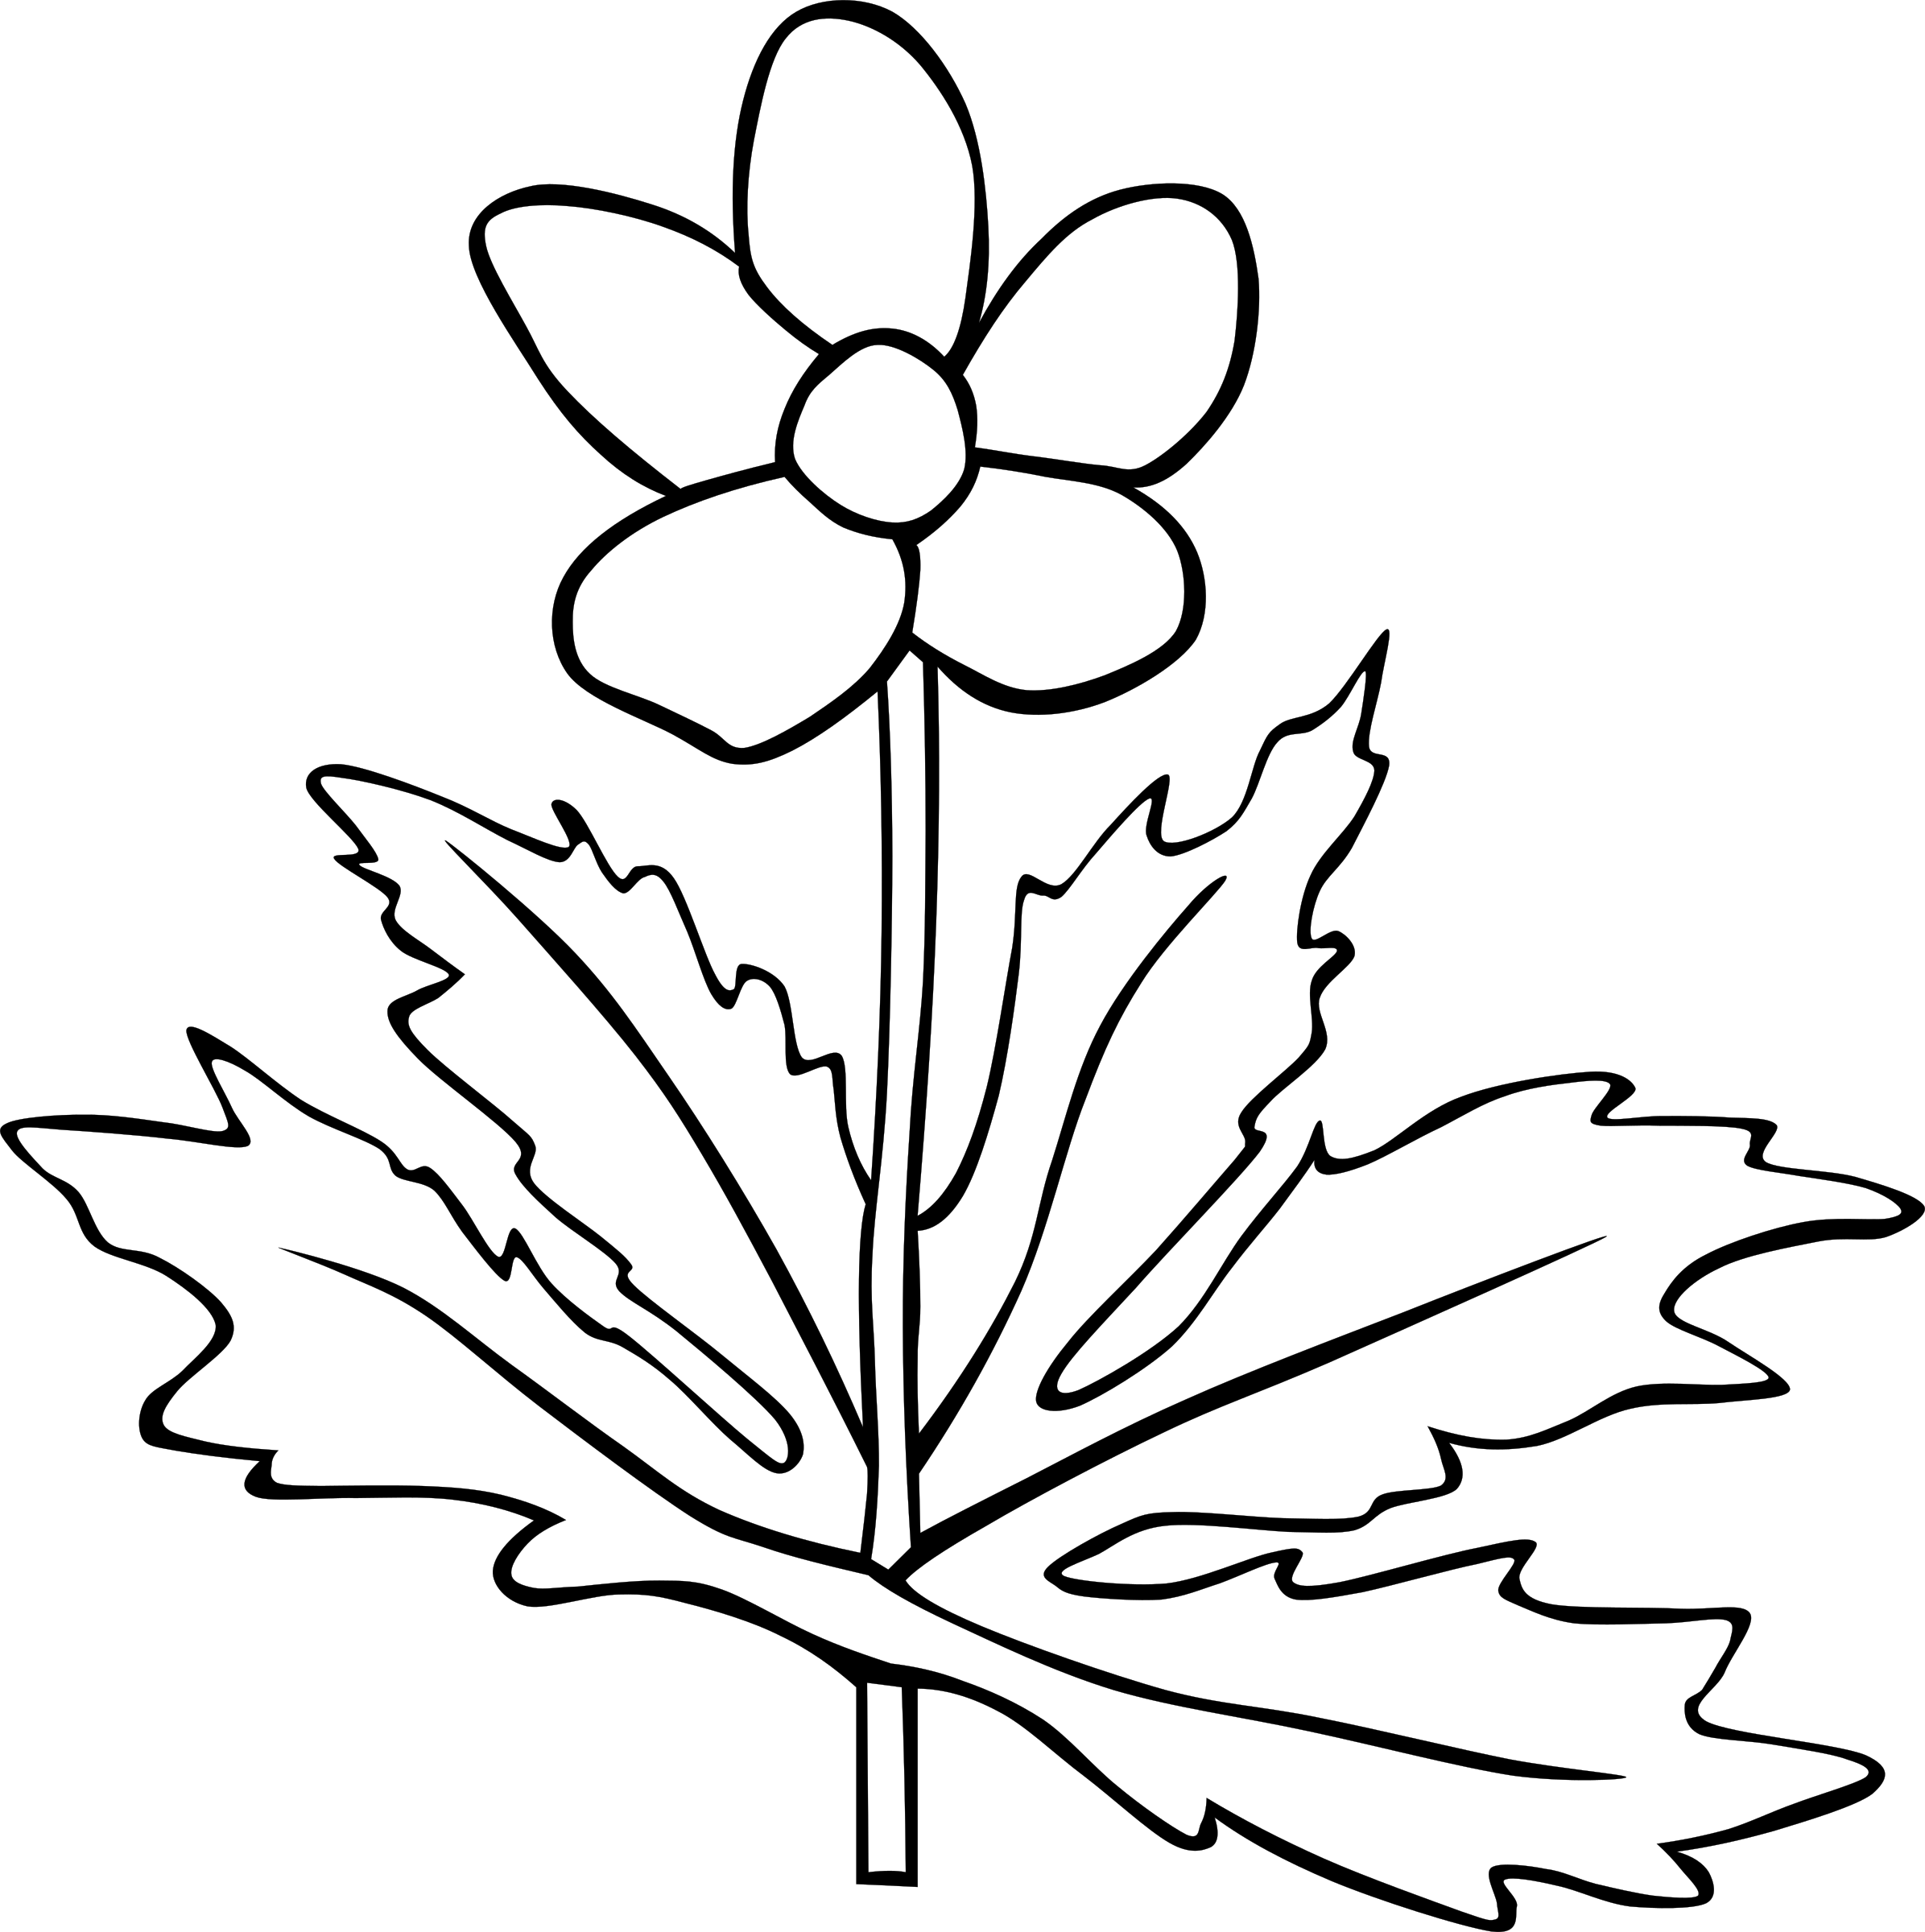 Flower outline png. Anemone canadensis icons free